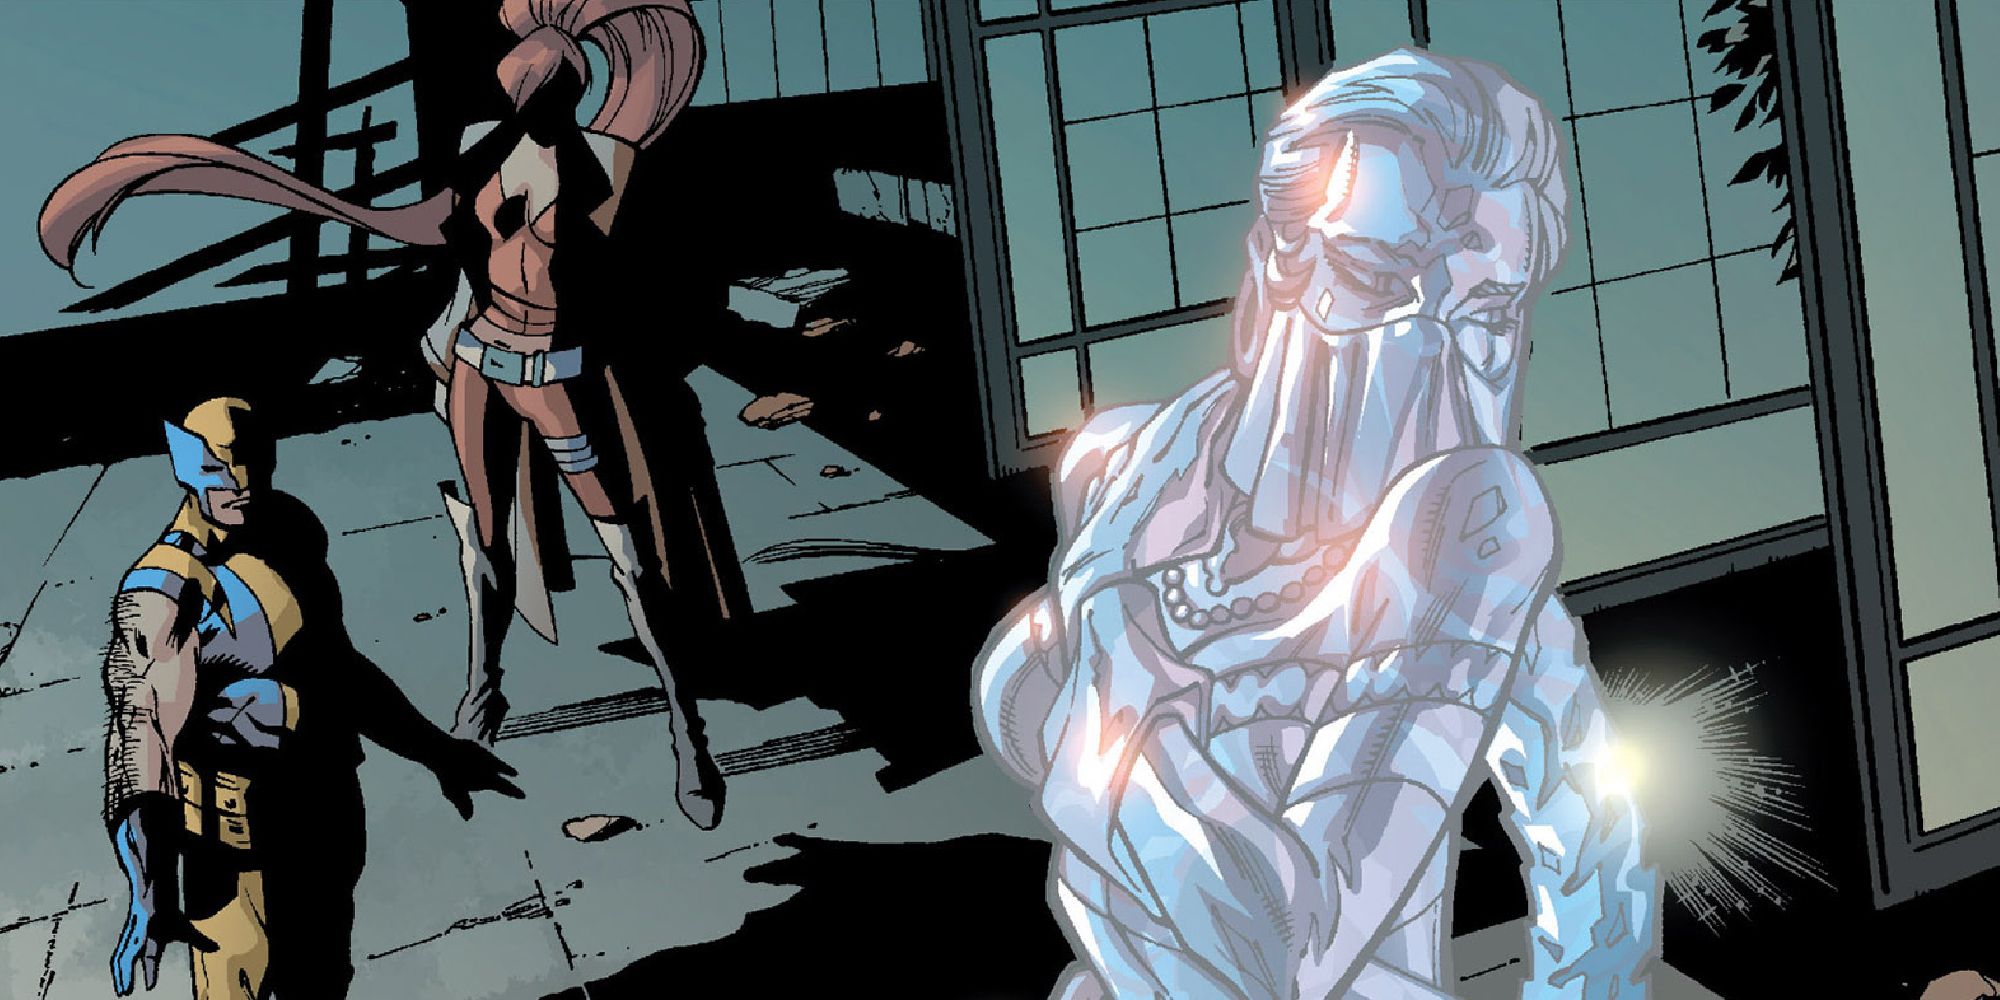 Elsa and Wolverine confront the frozen Dreaming Maiden in the comics